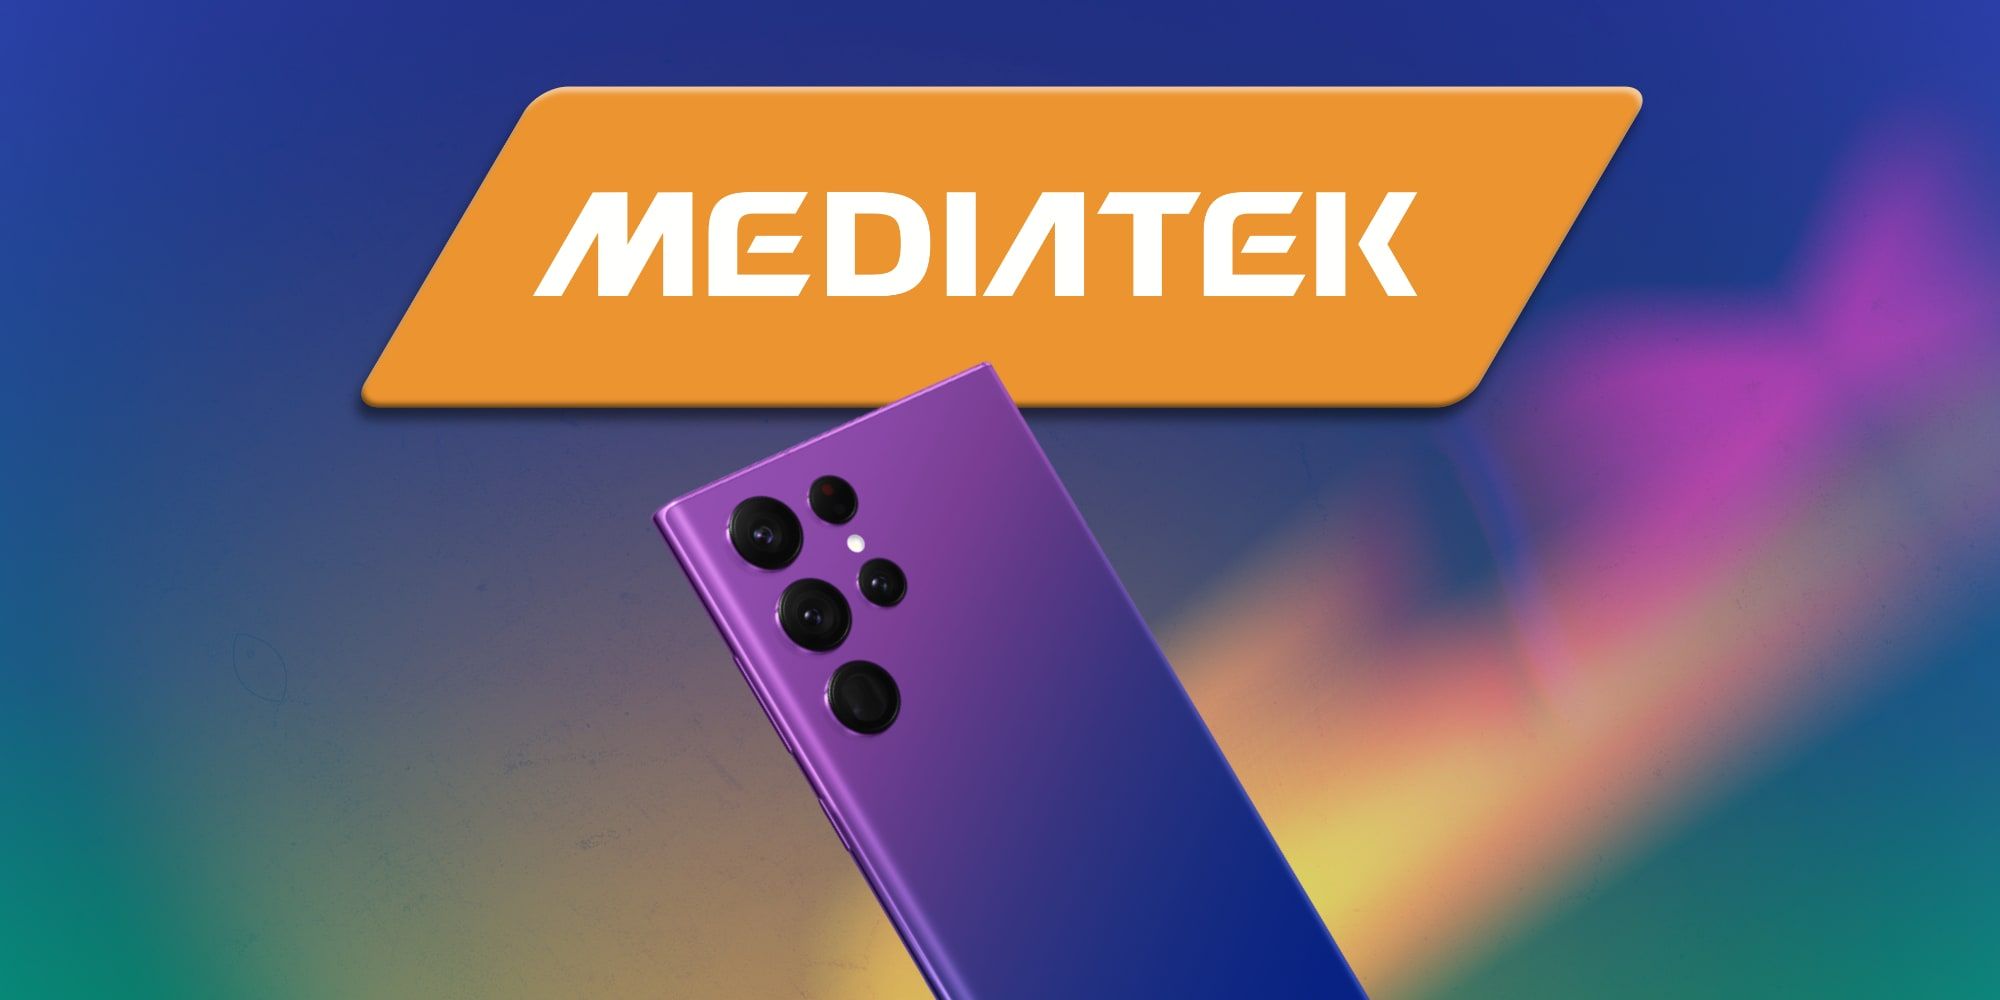 The Samsung Galaxy S23 and S22 FE may use MediaTek chips for the first time